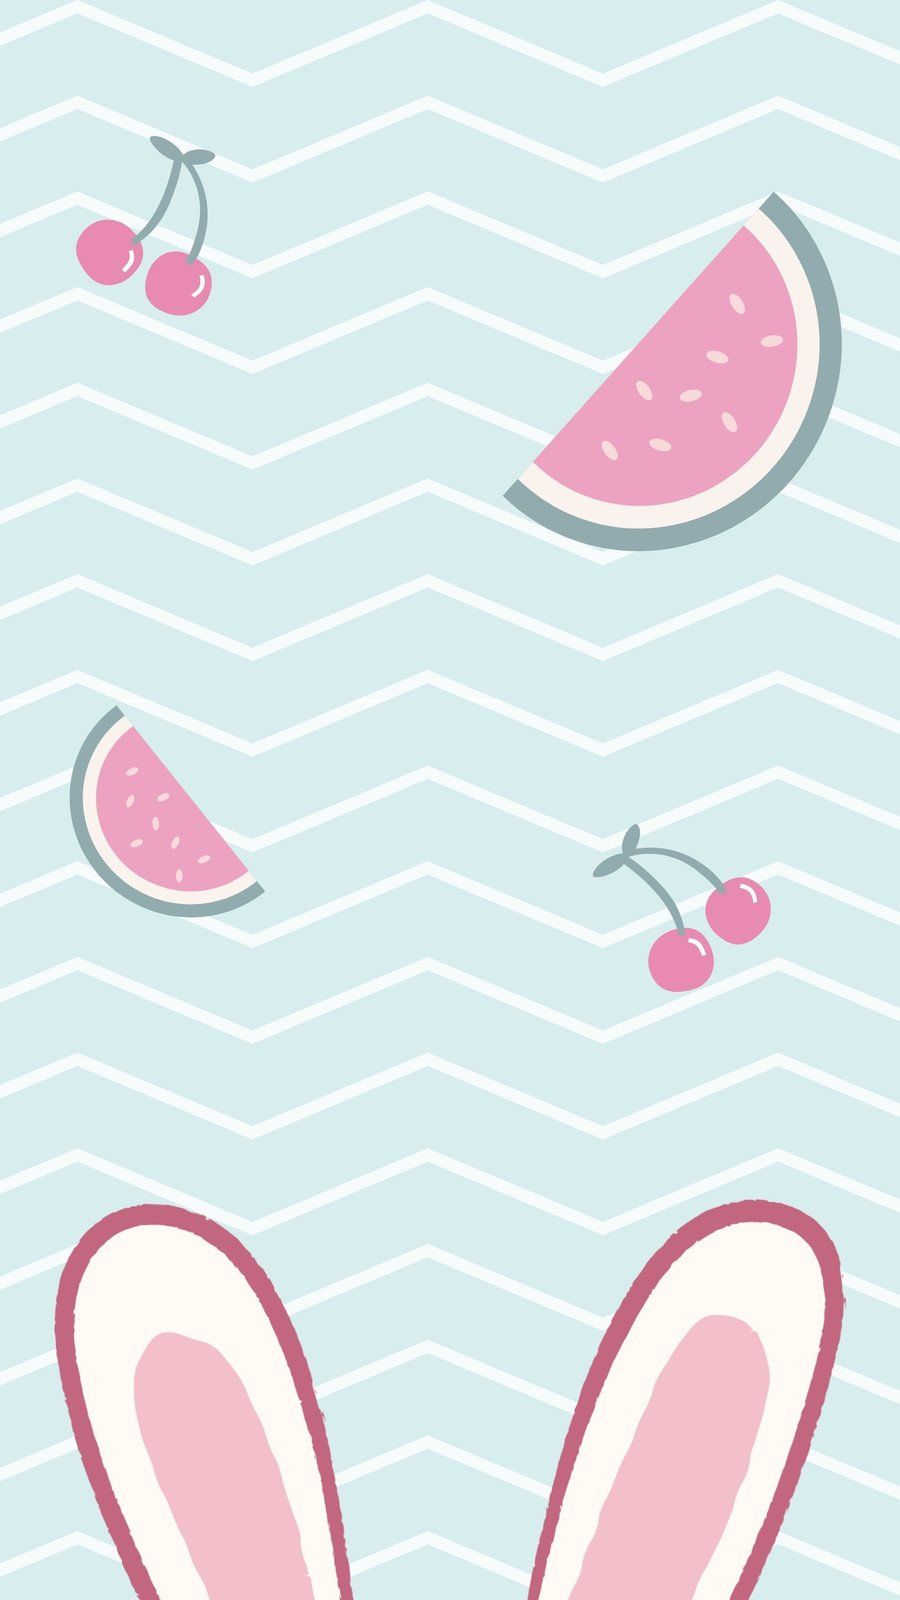 IPhone wallpaper with a cute rabbit, watermelon and cherry - Cute pink